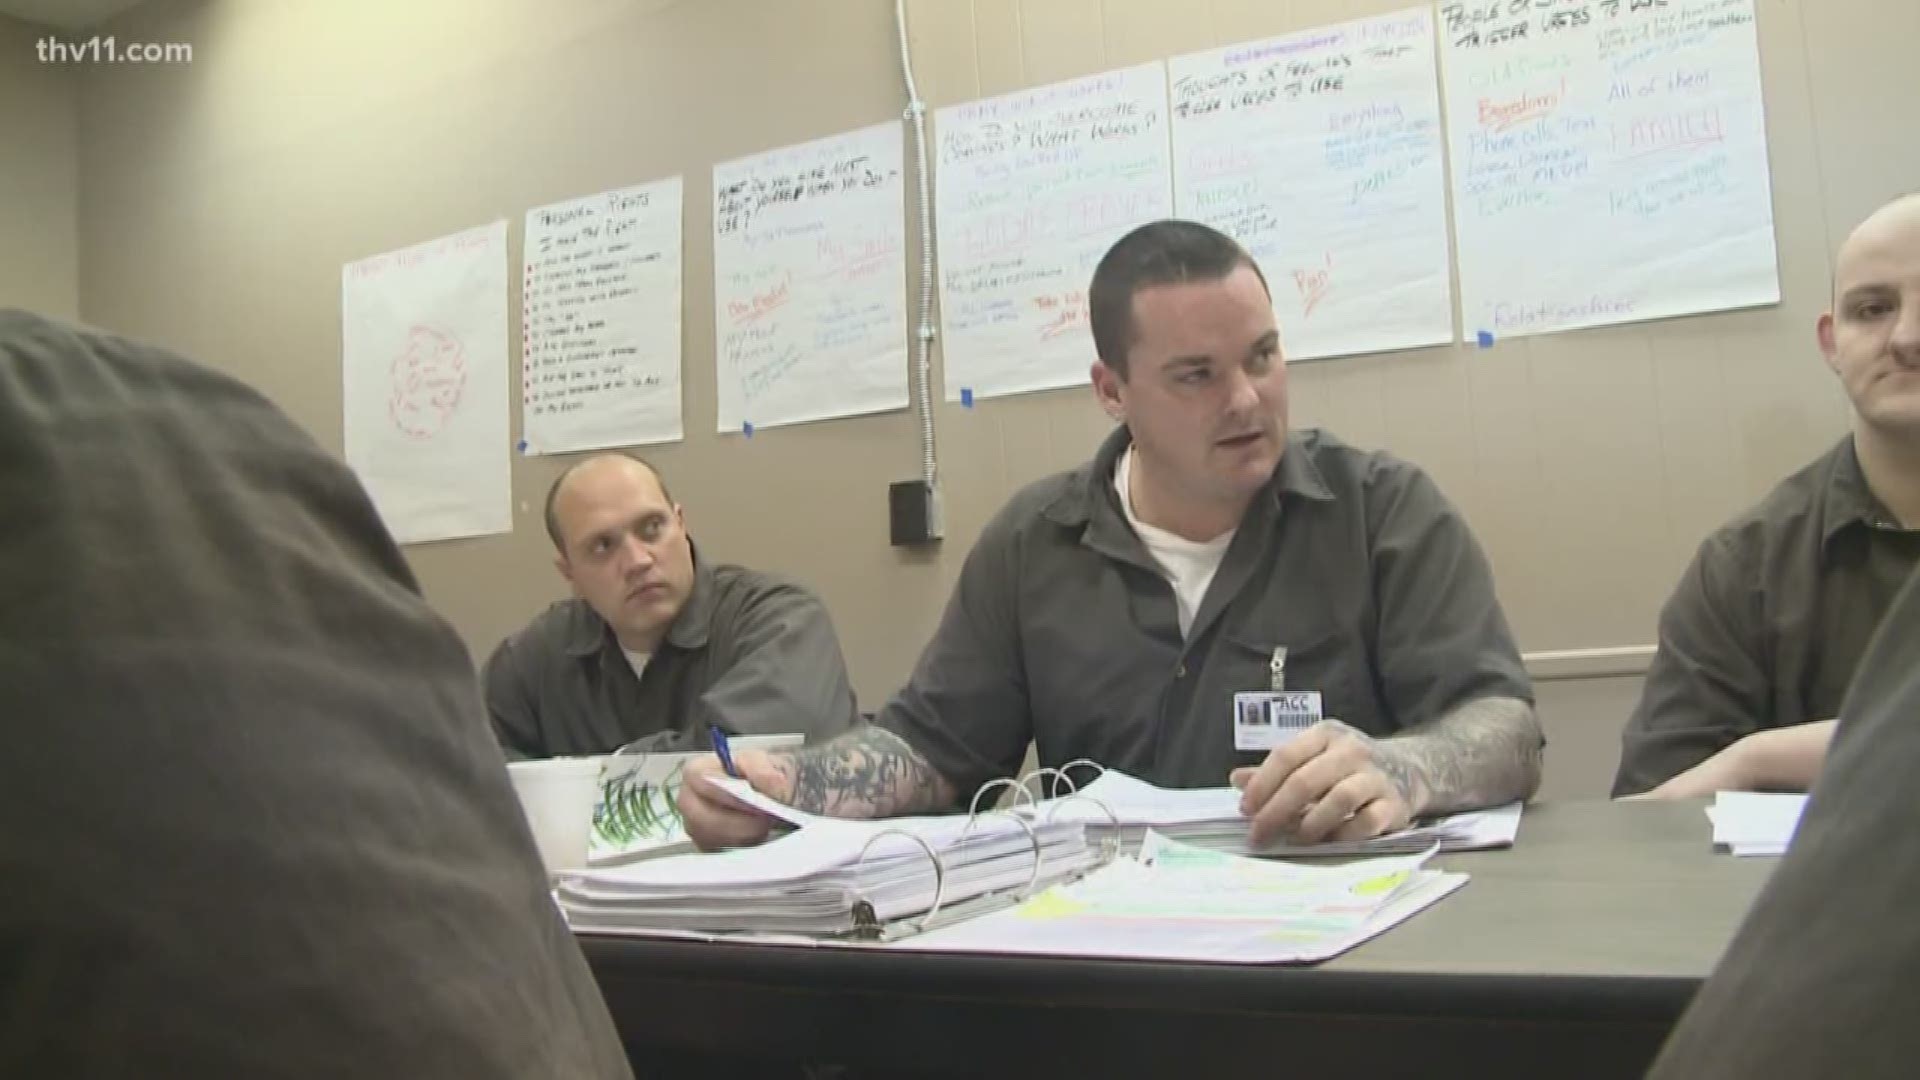 Program helping released inmates needs donations in order to continue.